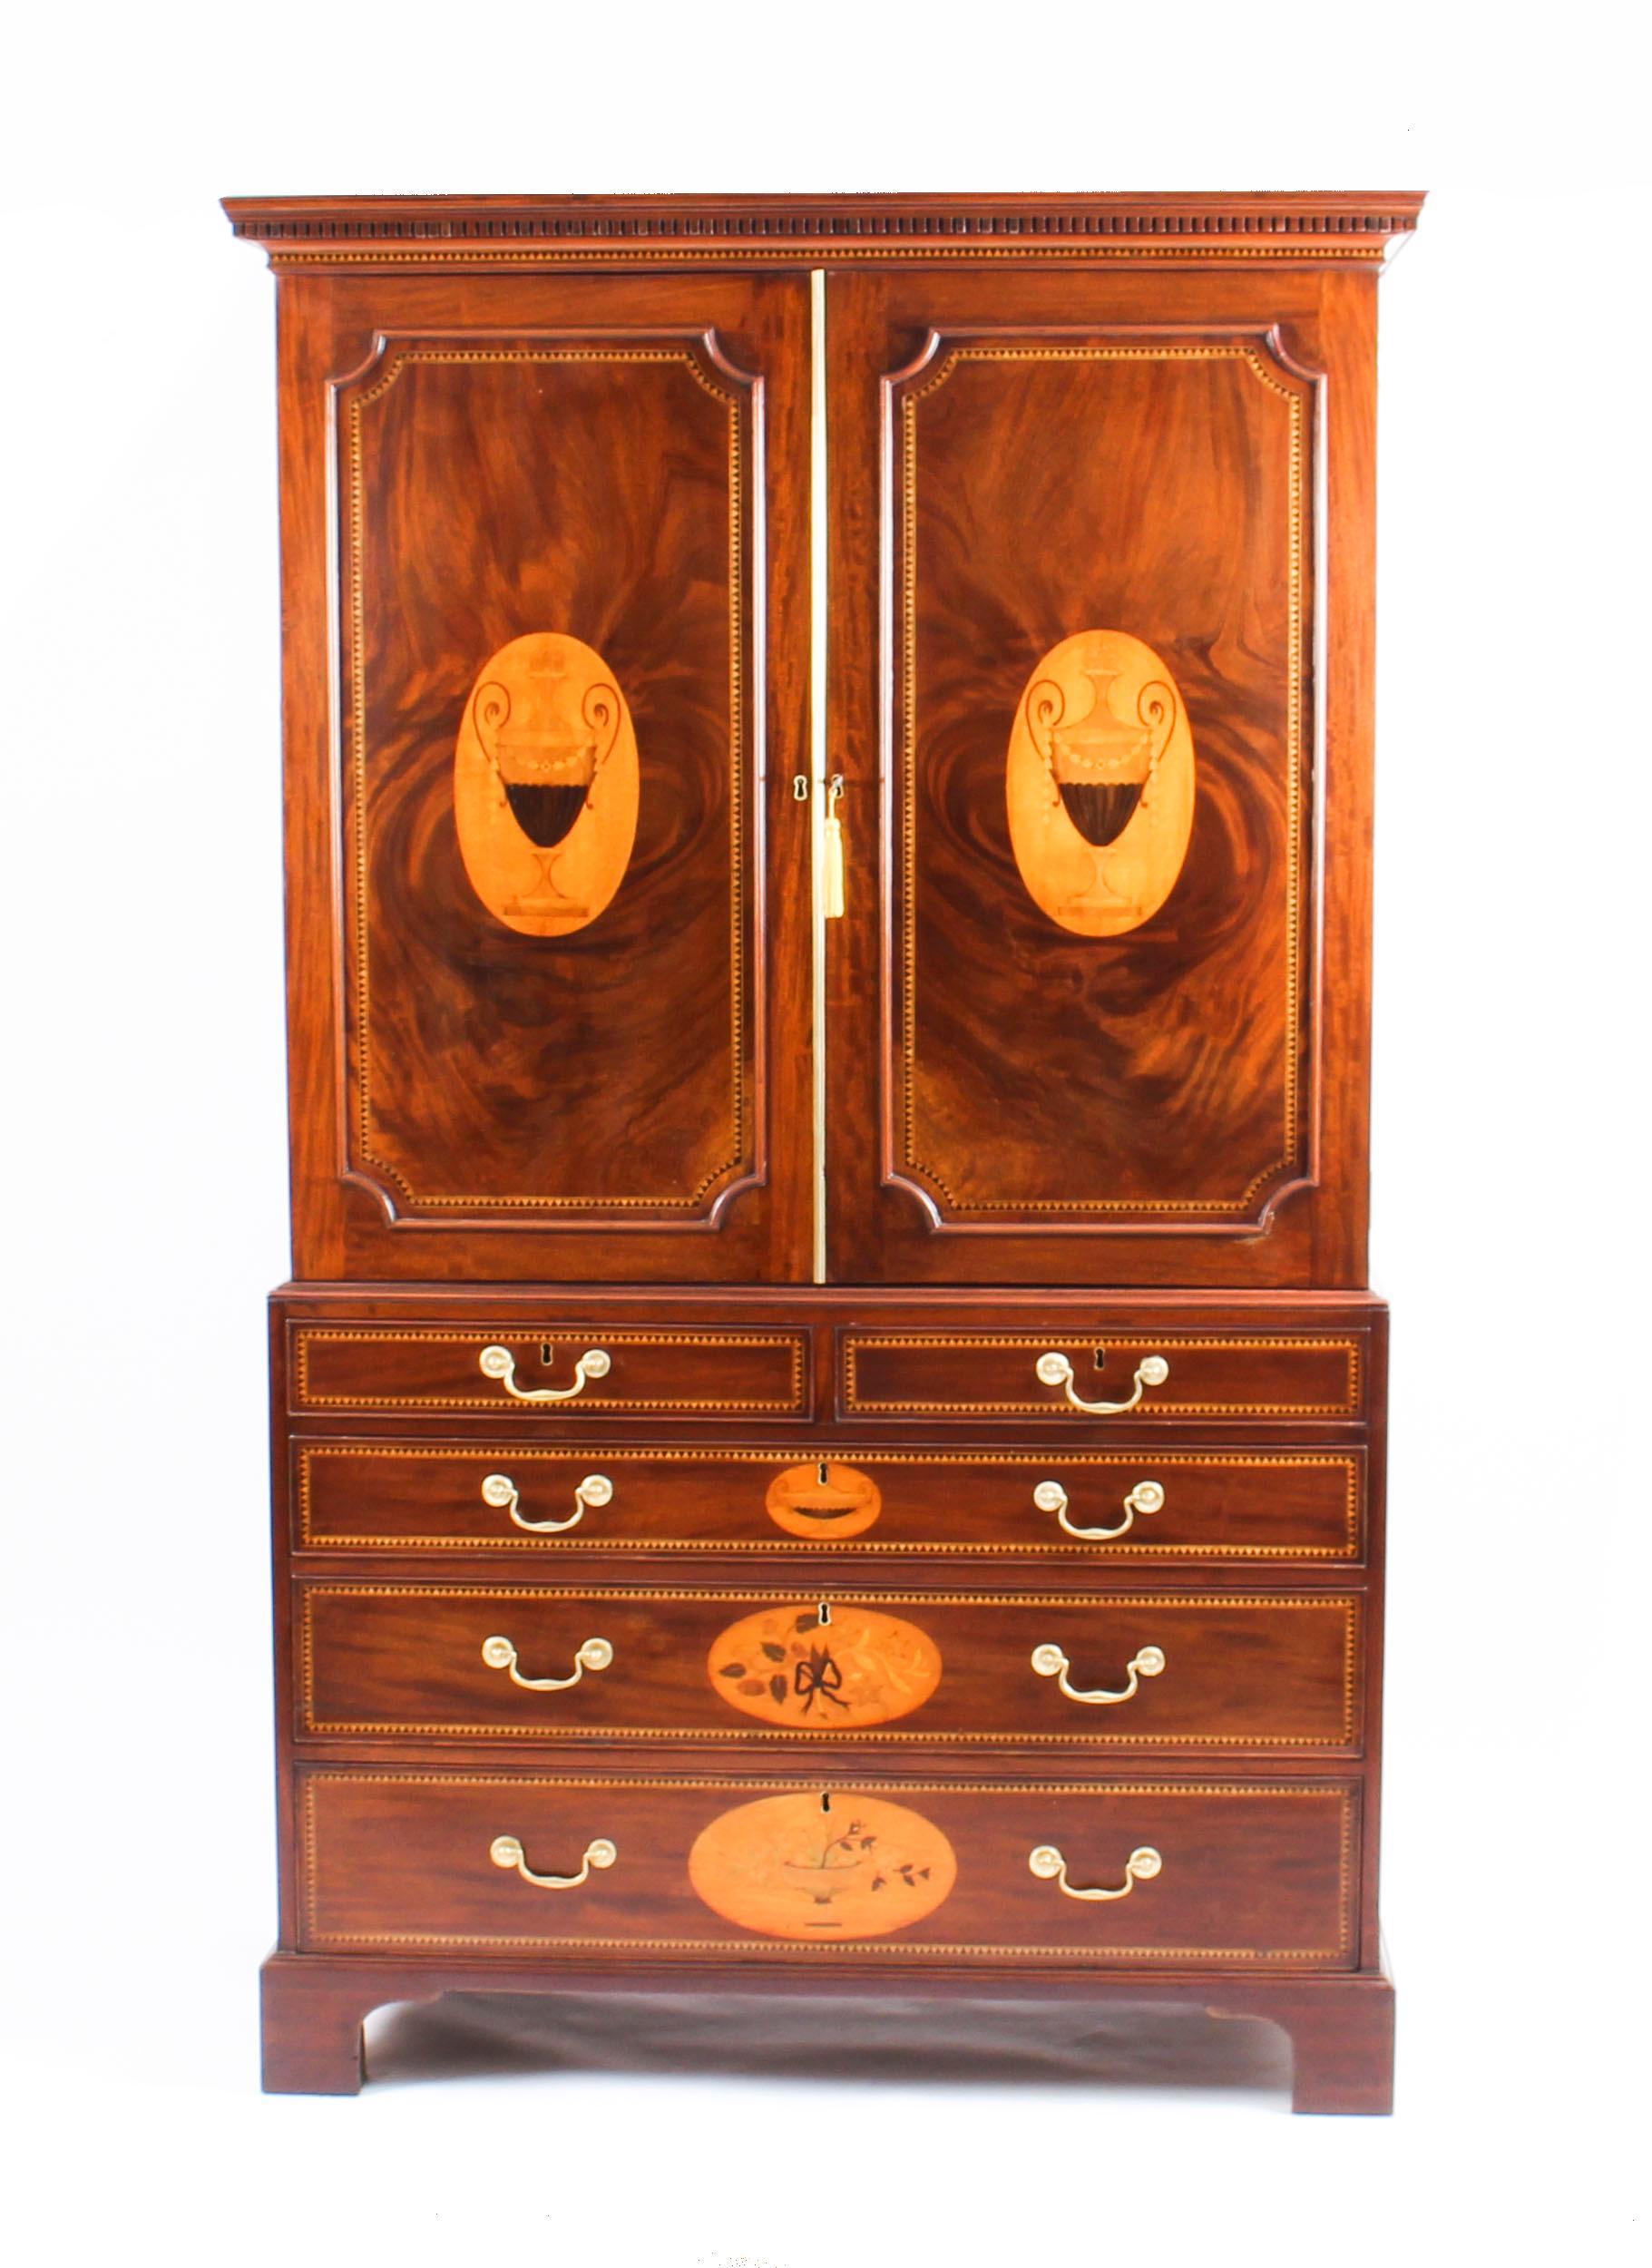 This is a spectacular antique George III flame mahogany and satinwood marquetry linen press, circa 1780 in date.
 
This splendid linen press features an exquisite dentil cornice above a gorgeous pair of cupboard doors that have been masterfully